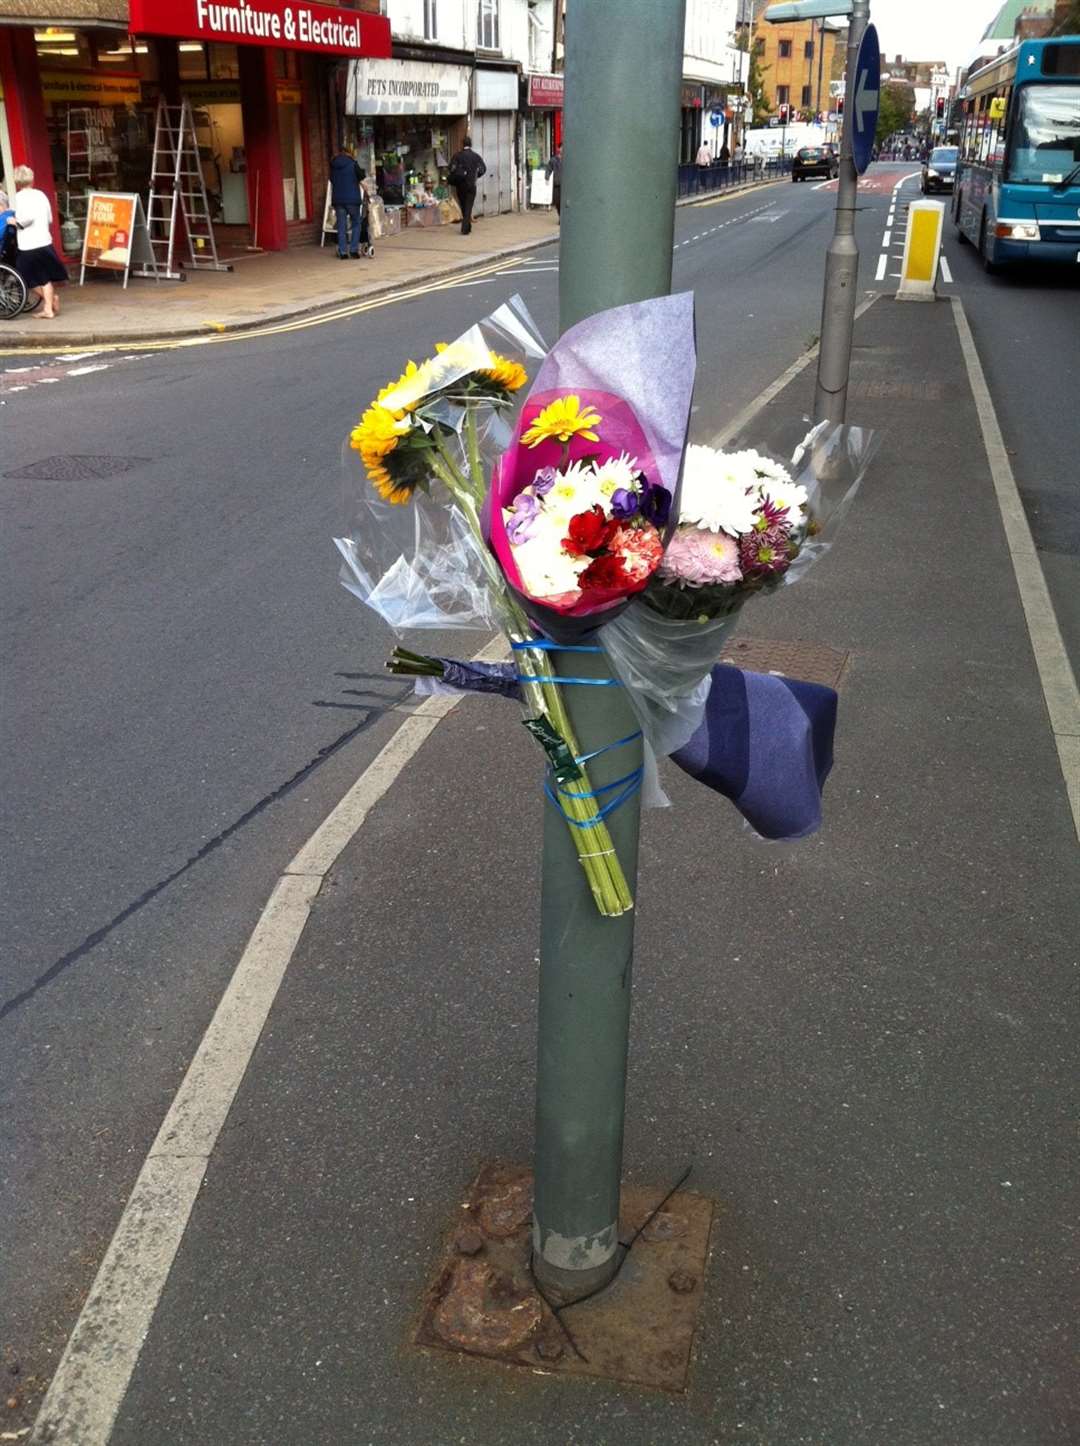 Floral tributes have been left to the woman at the scene of the tragic accident.